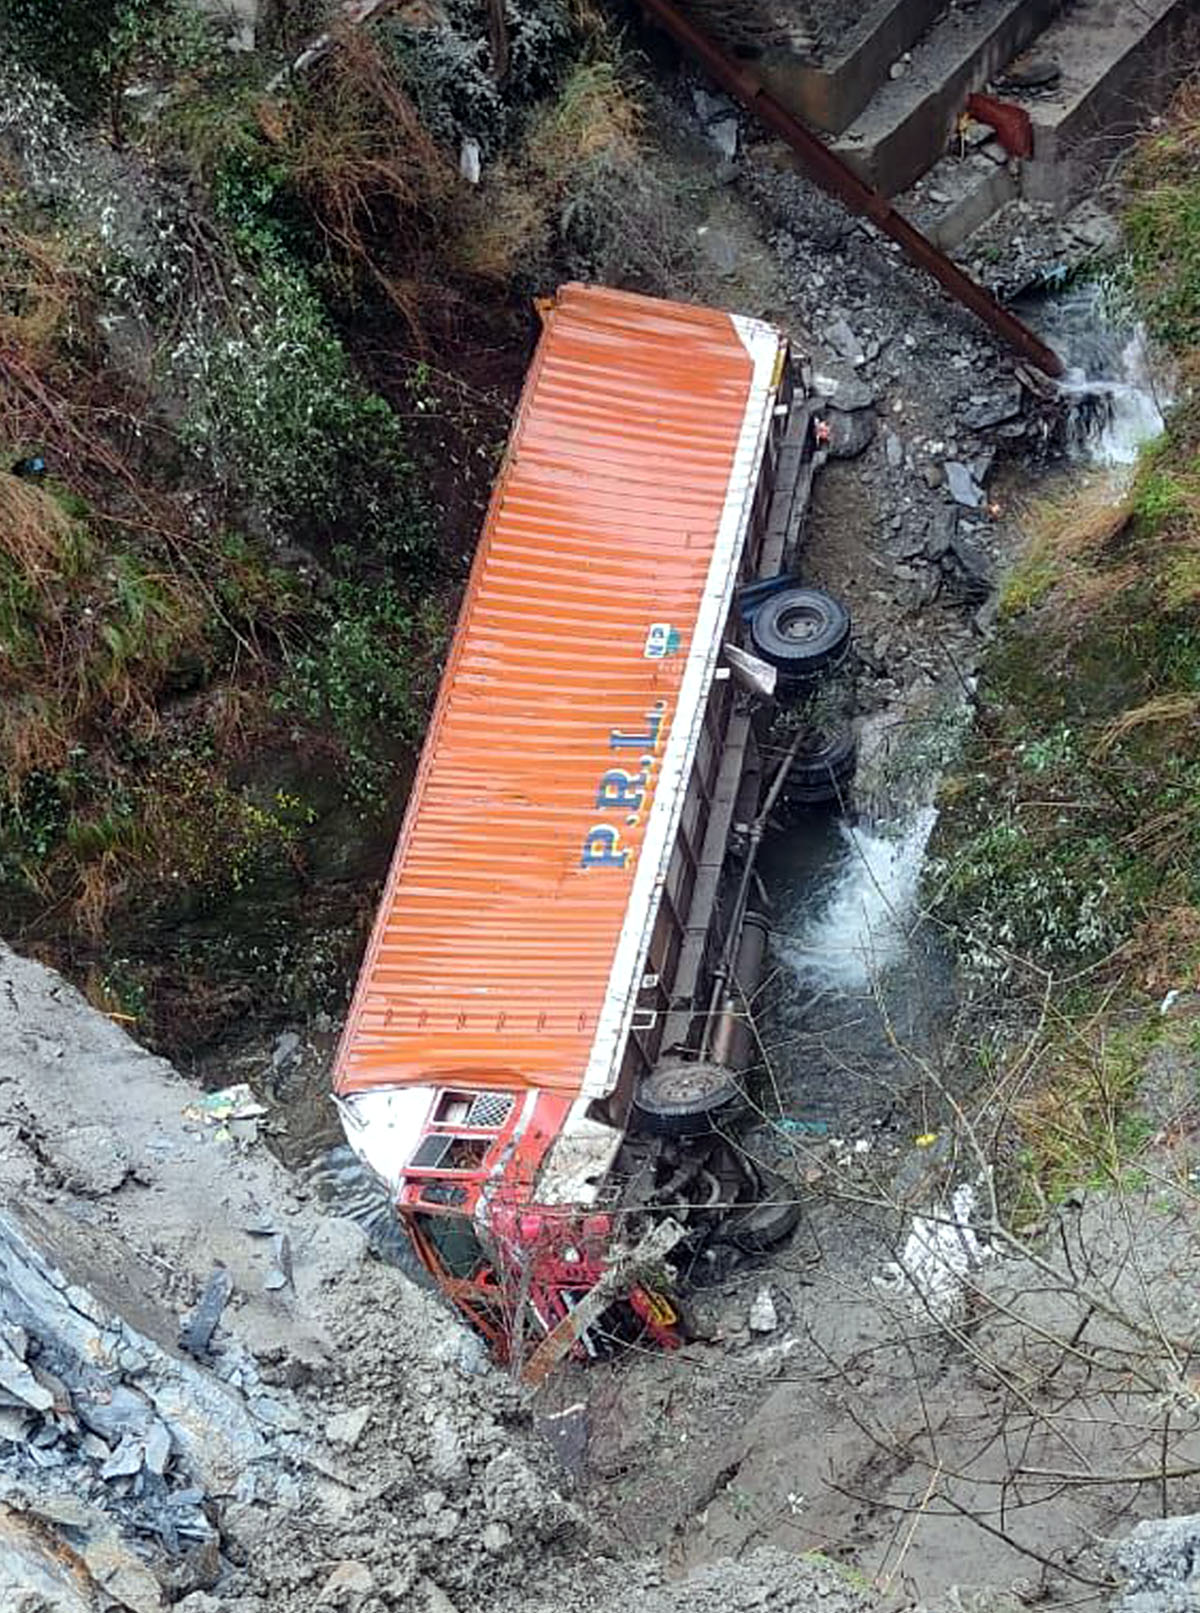 Ill-fated truck lying in gorge. —Excelsior/Pervaiz